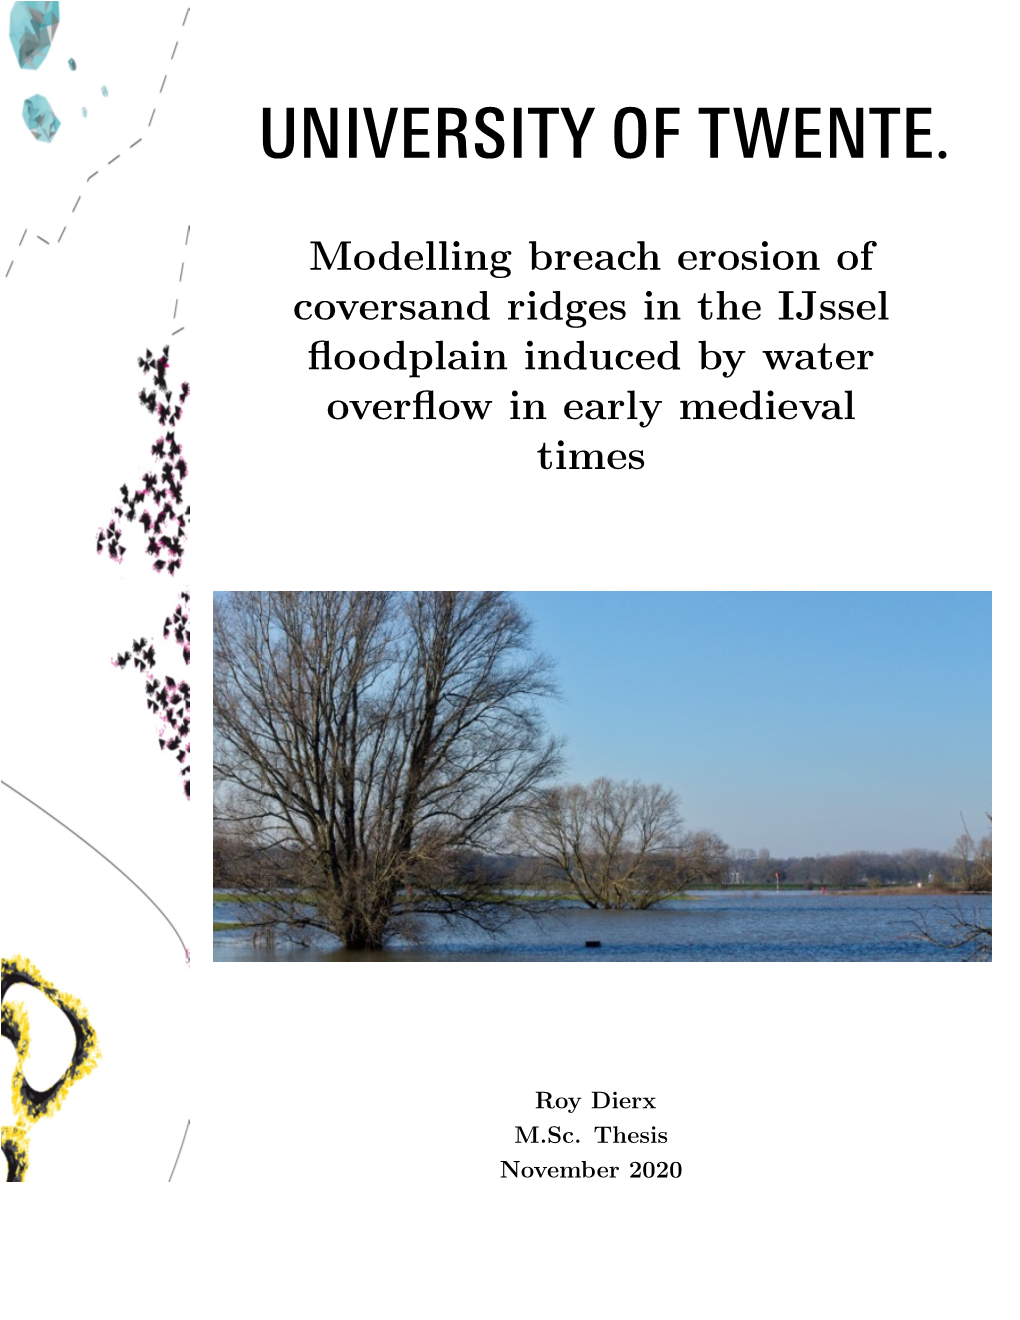 Modelling Breach Erosion of Coversand Ridges in the Ijssel ﬂoodplain Induced by Water Overﬂow in Early Medieval Times